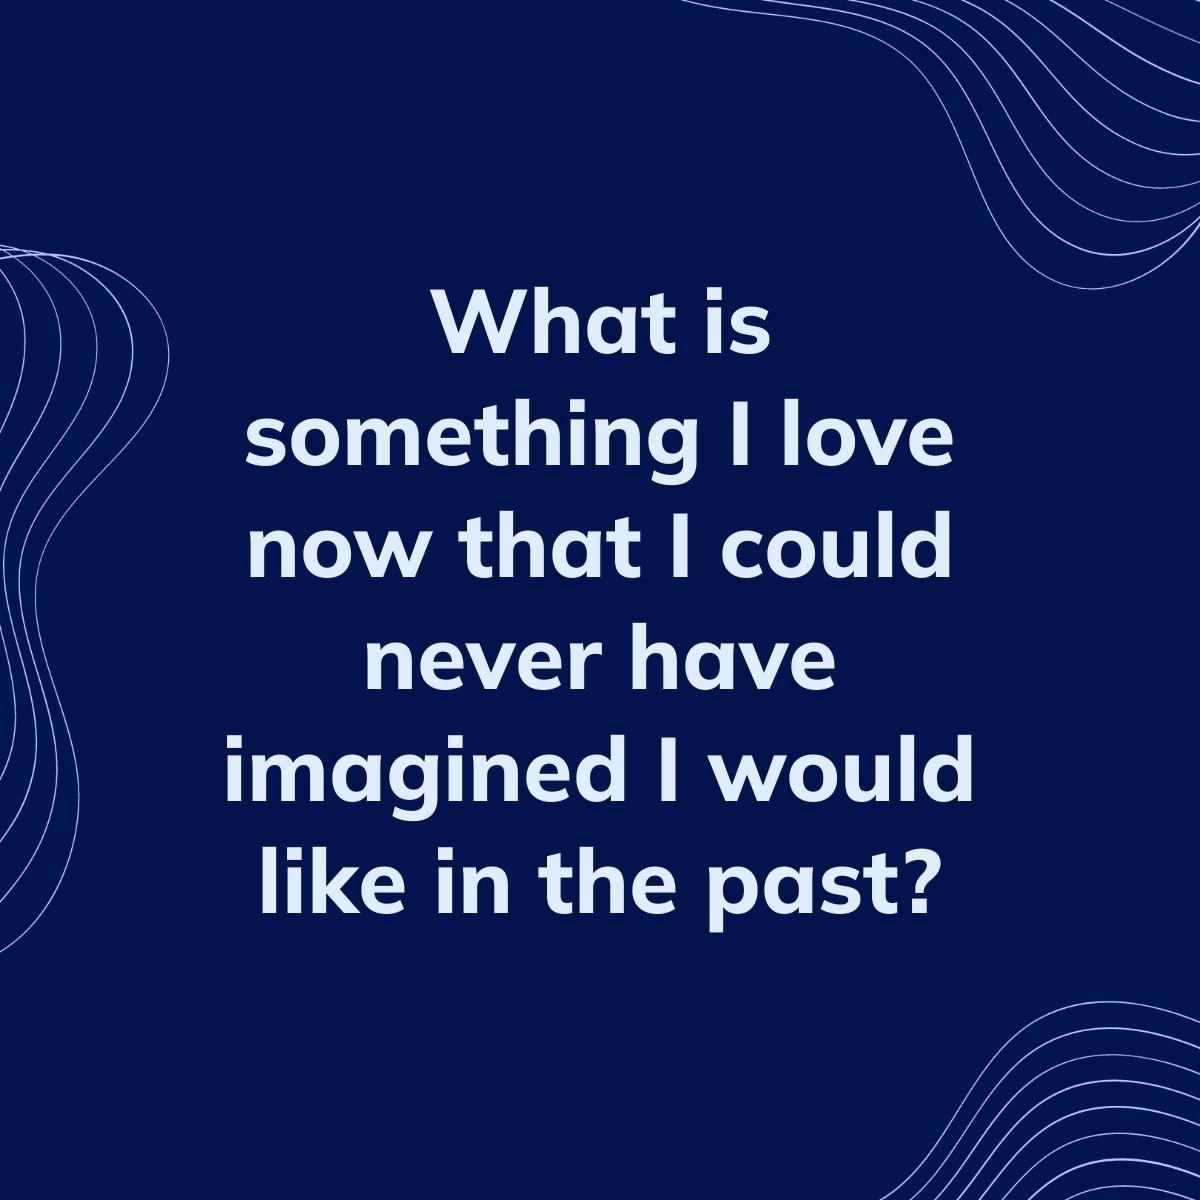 Journal Prompt: What is something I love now that I could never have imagined I would like in the past?